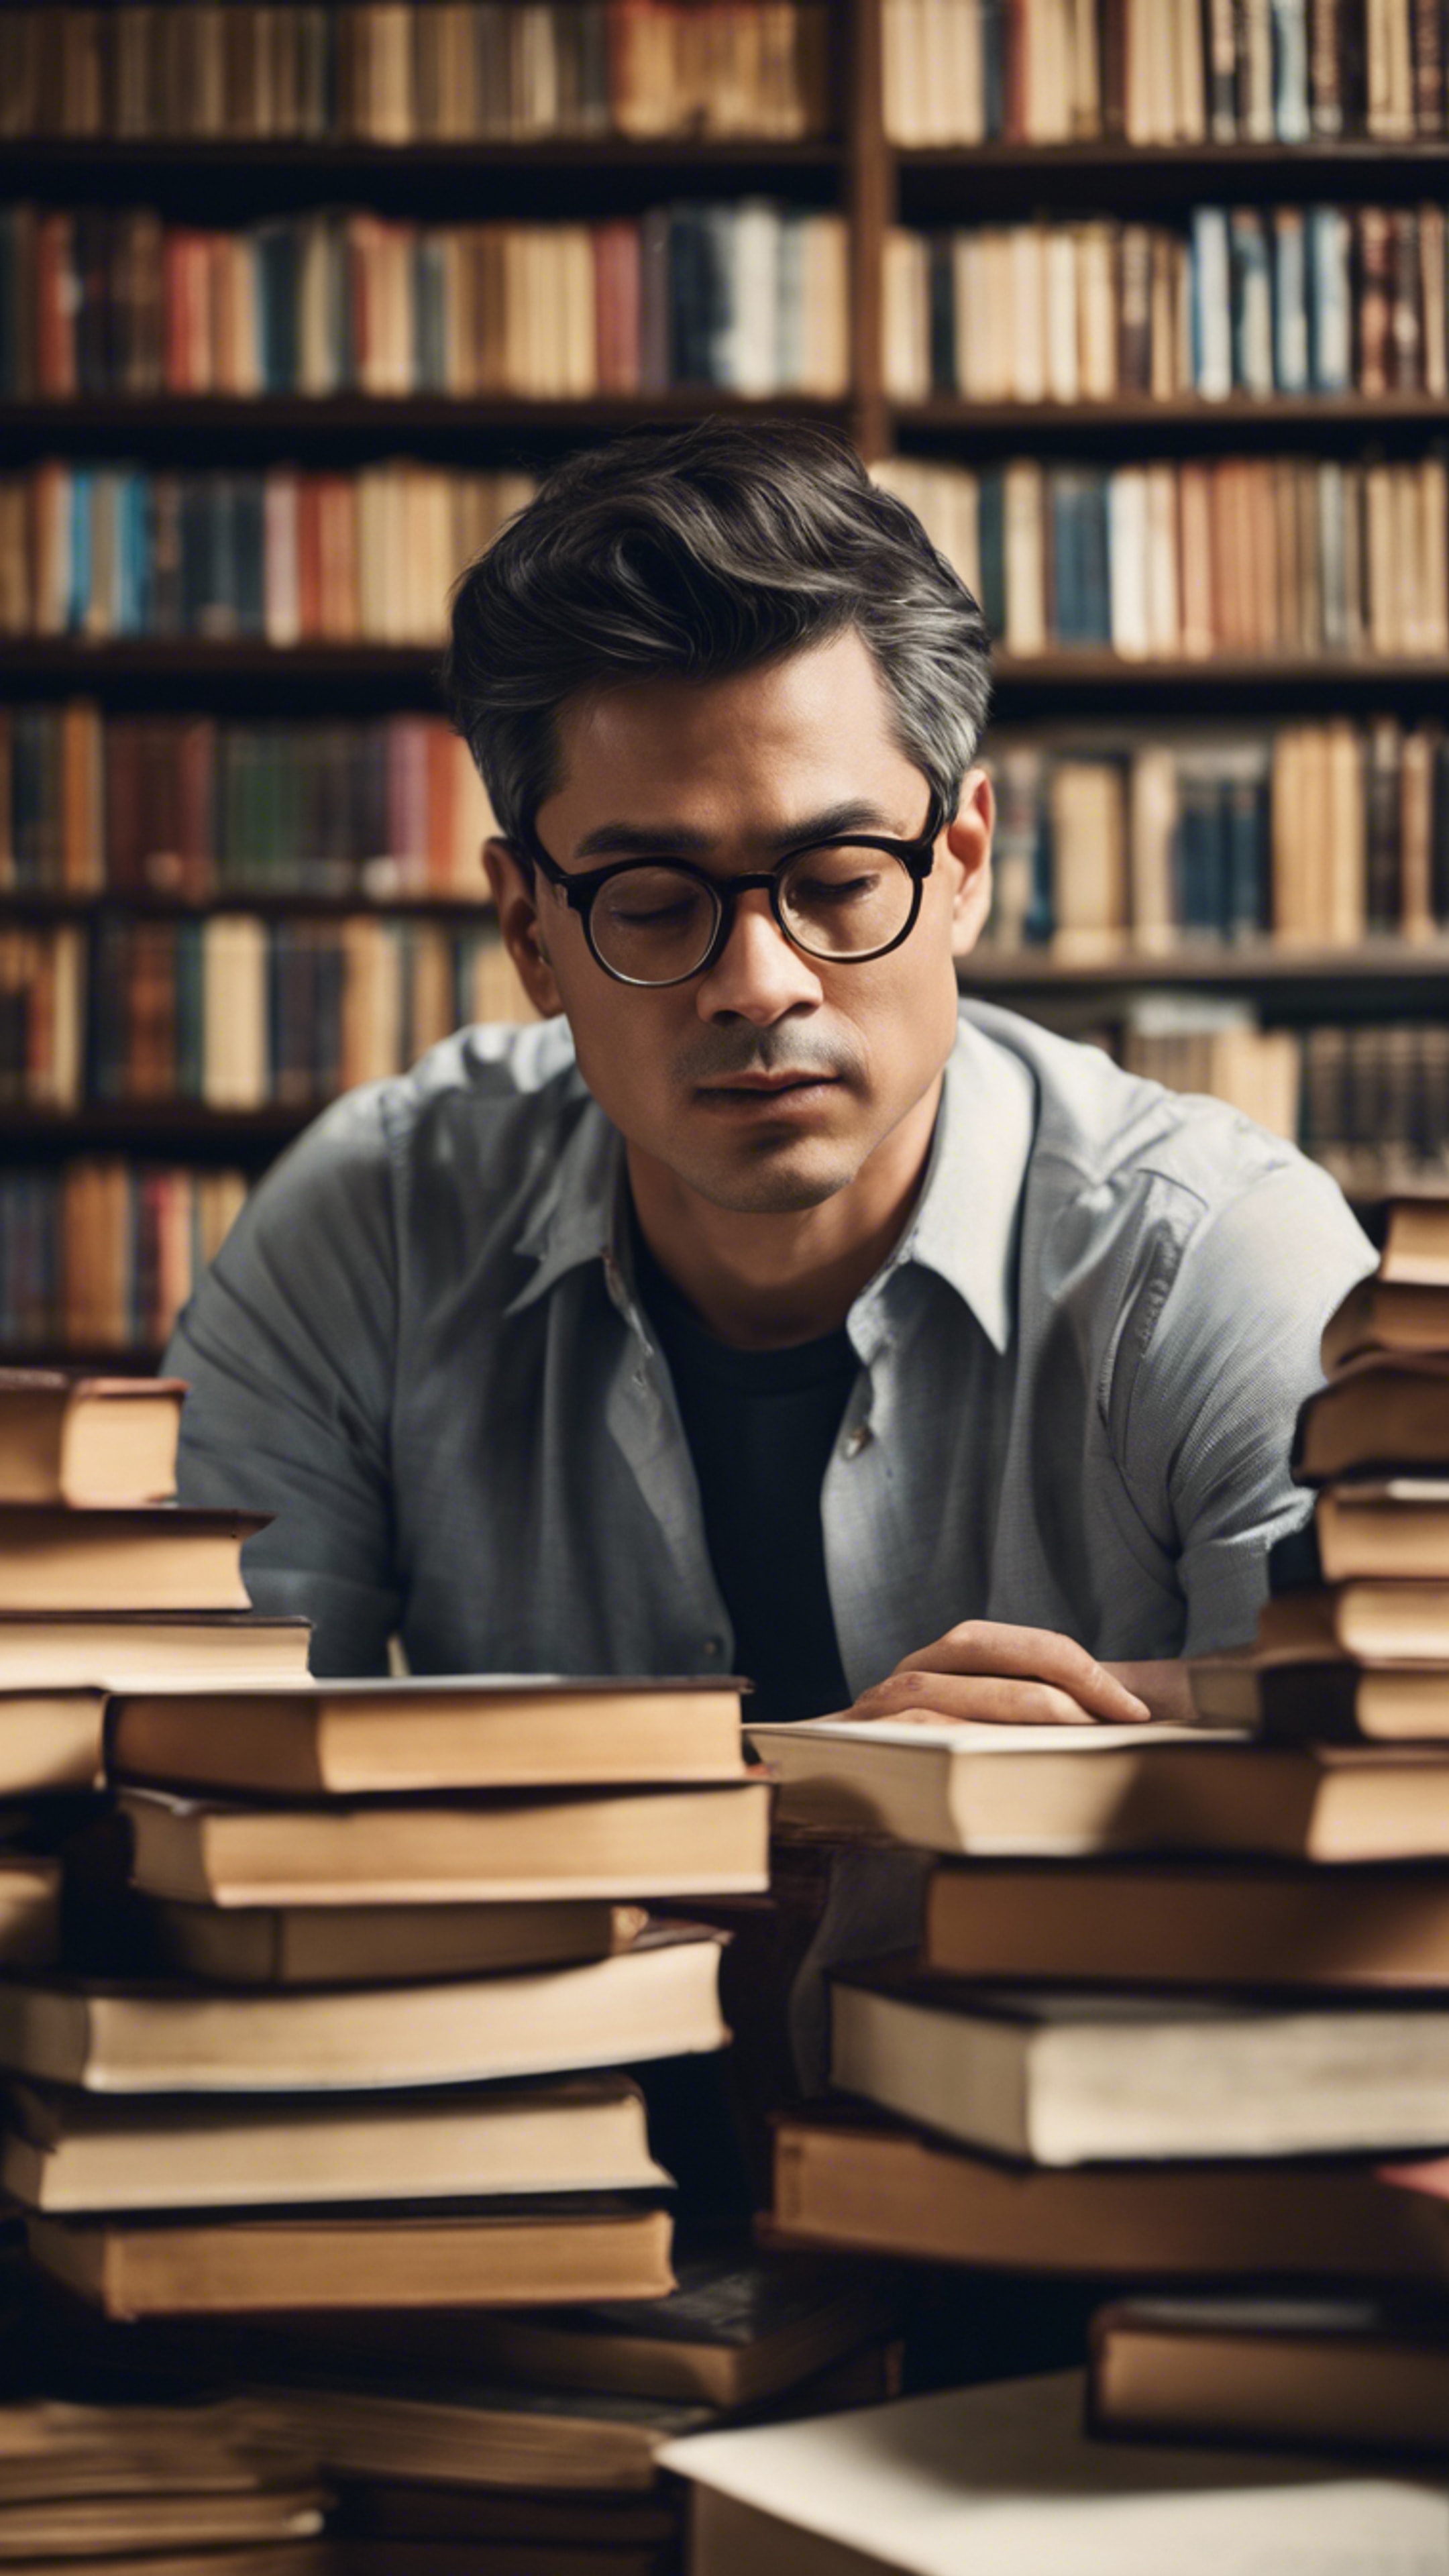 An intelligent man in glasses, deeply engrossed in his studies surrounded by stacks of books in a quiet library. Обои[88f4531613da45079a41]